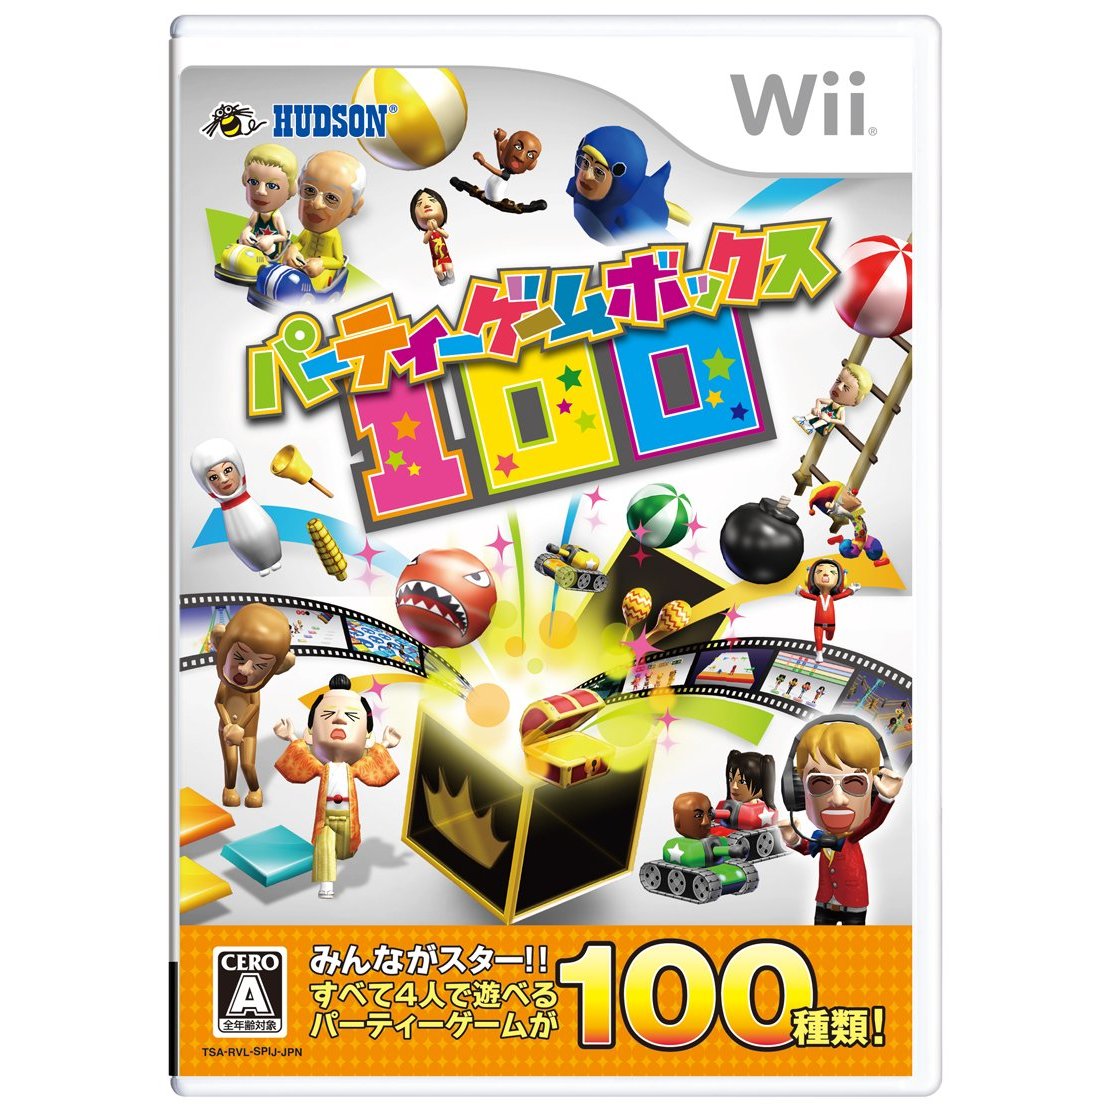 wii game isos download